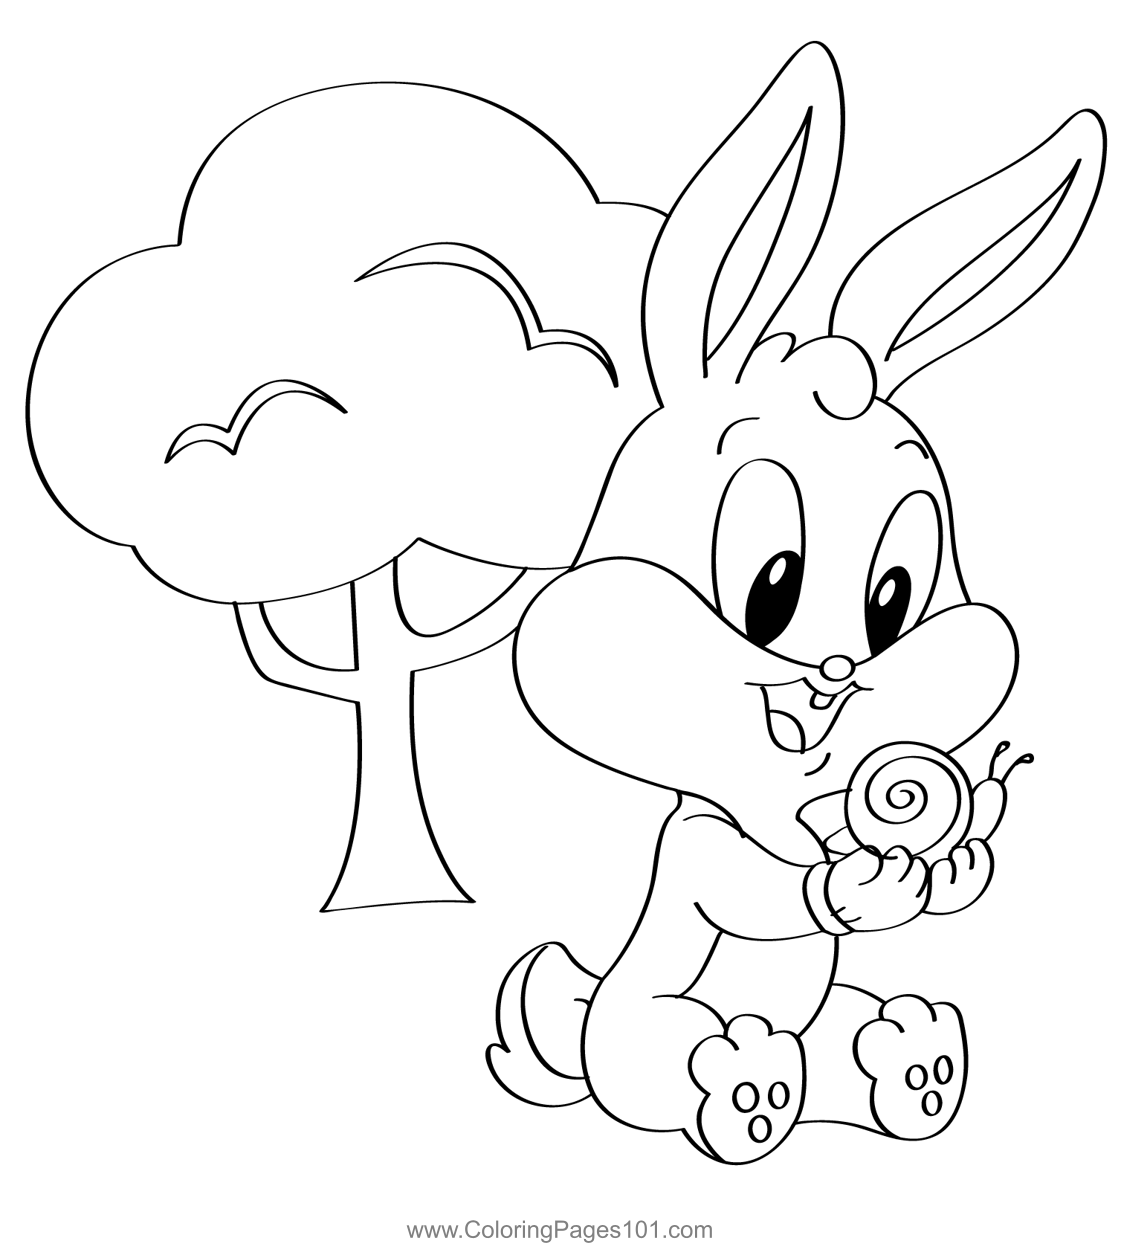 Baby bugs bunny with snail coloring page for kids